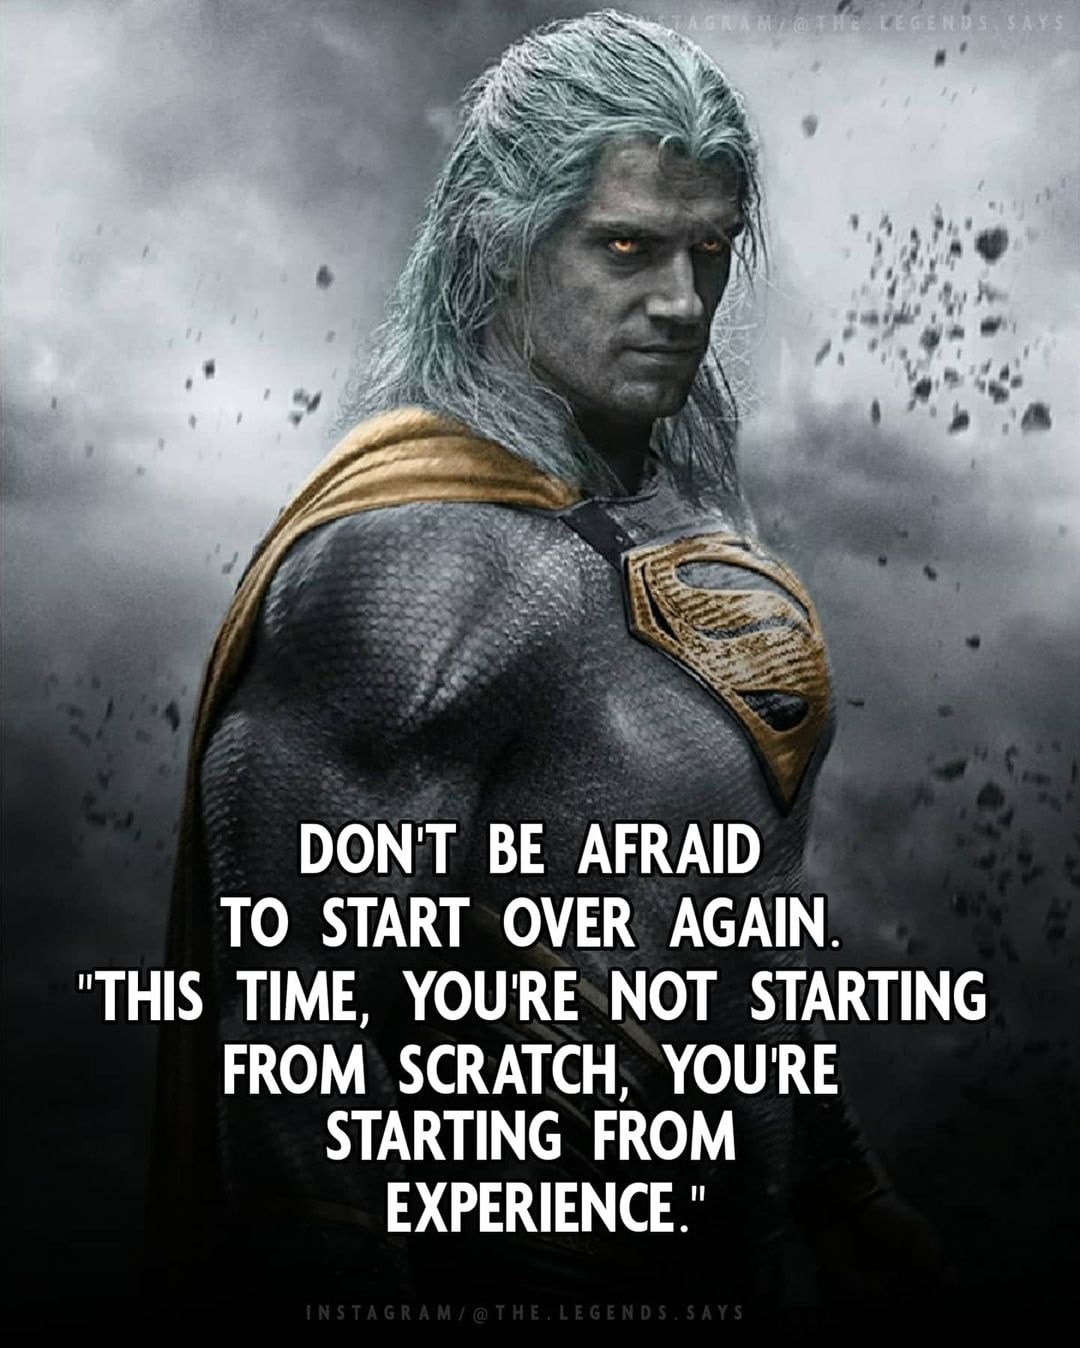 Don’t be afraid to start again. This time, you’re not starting from scratch. You’re starting from experience.